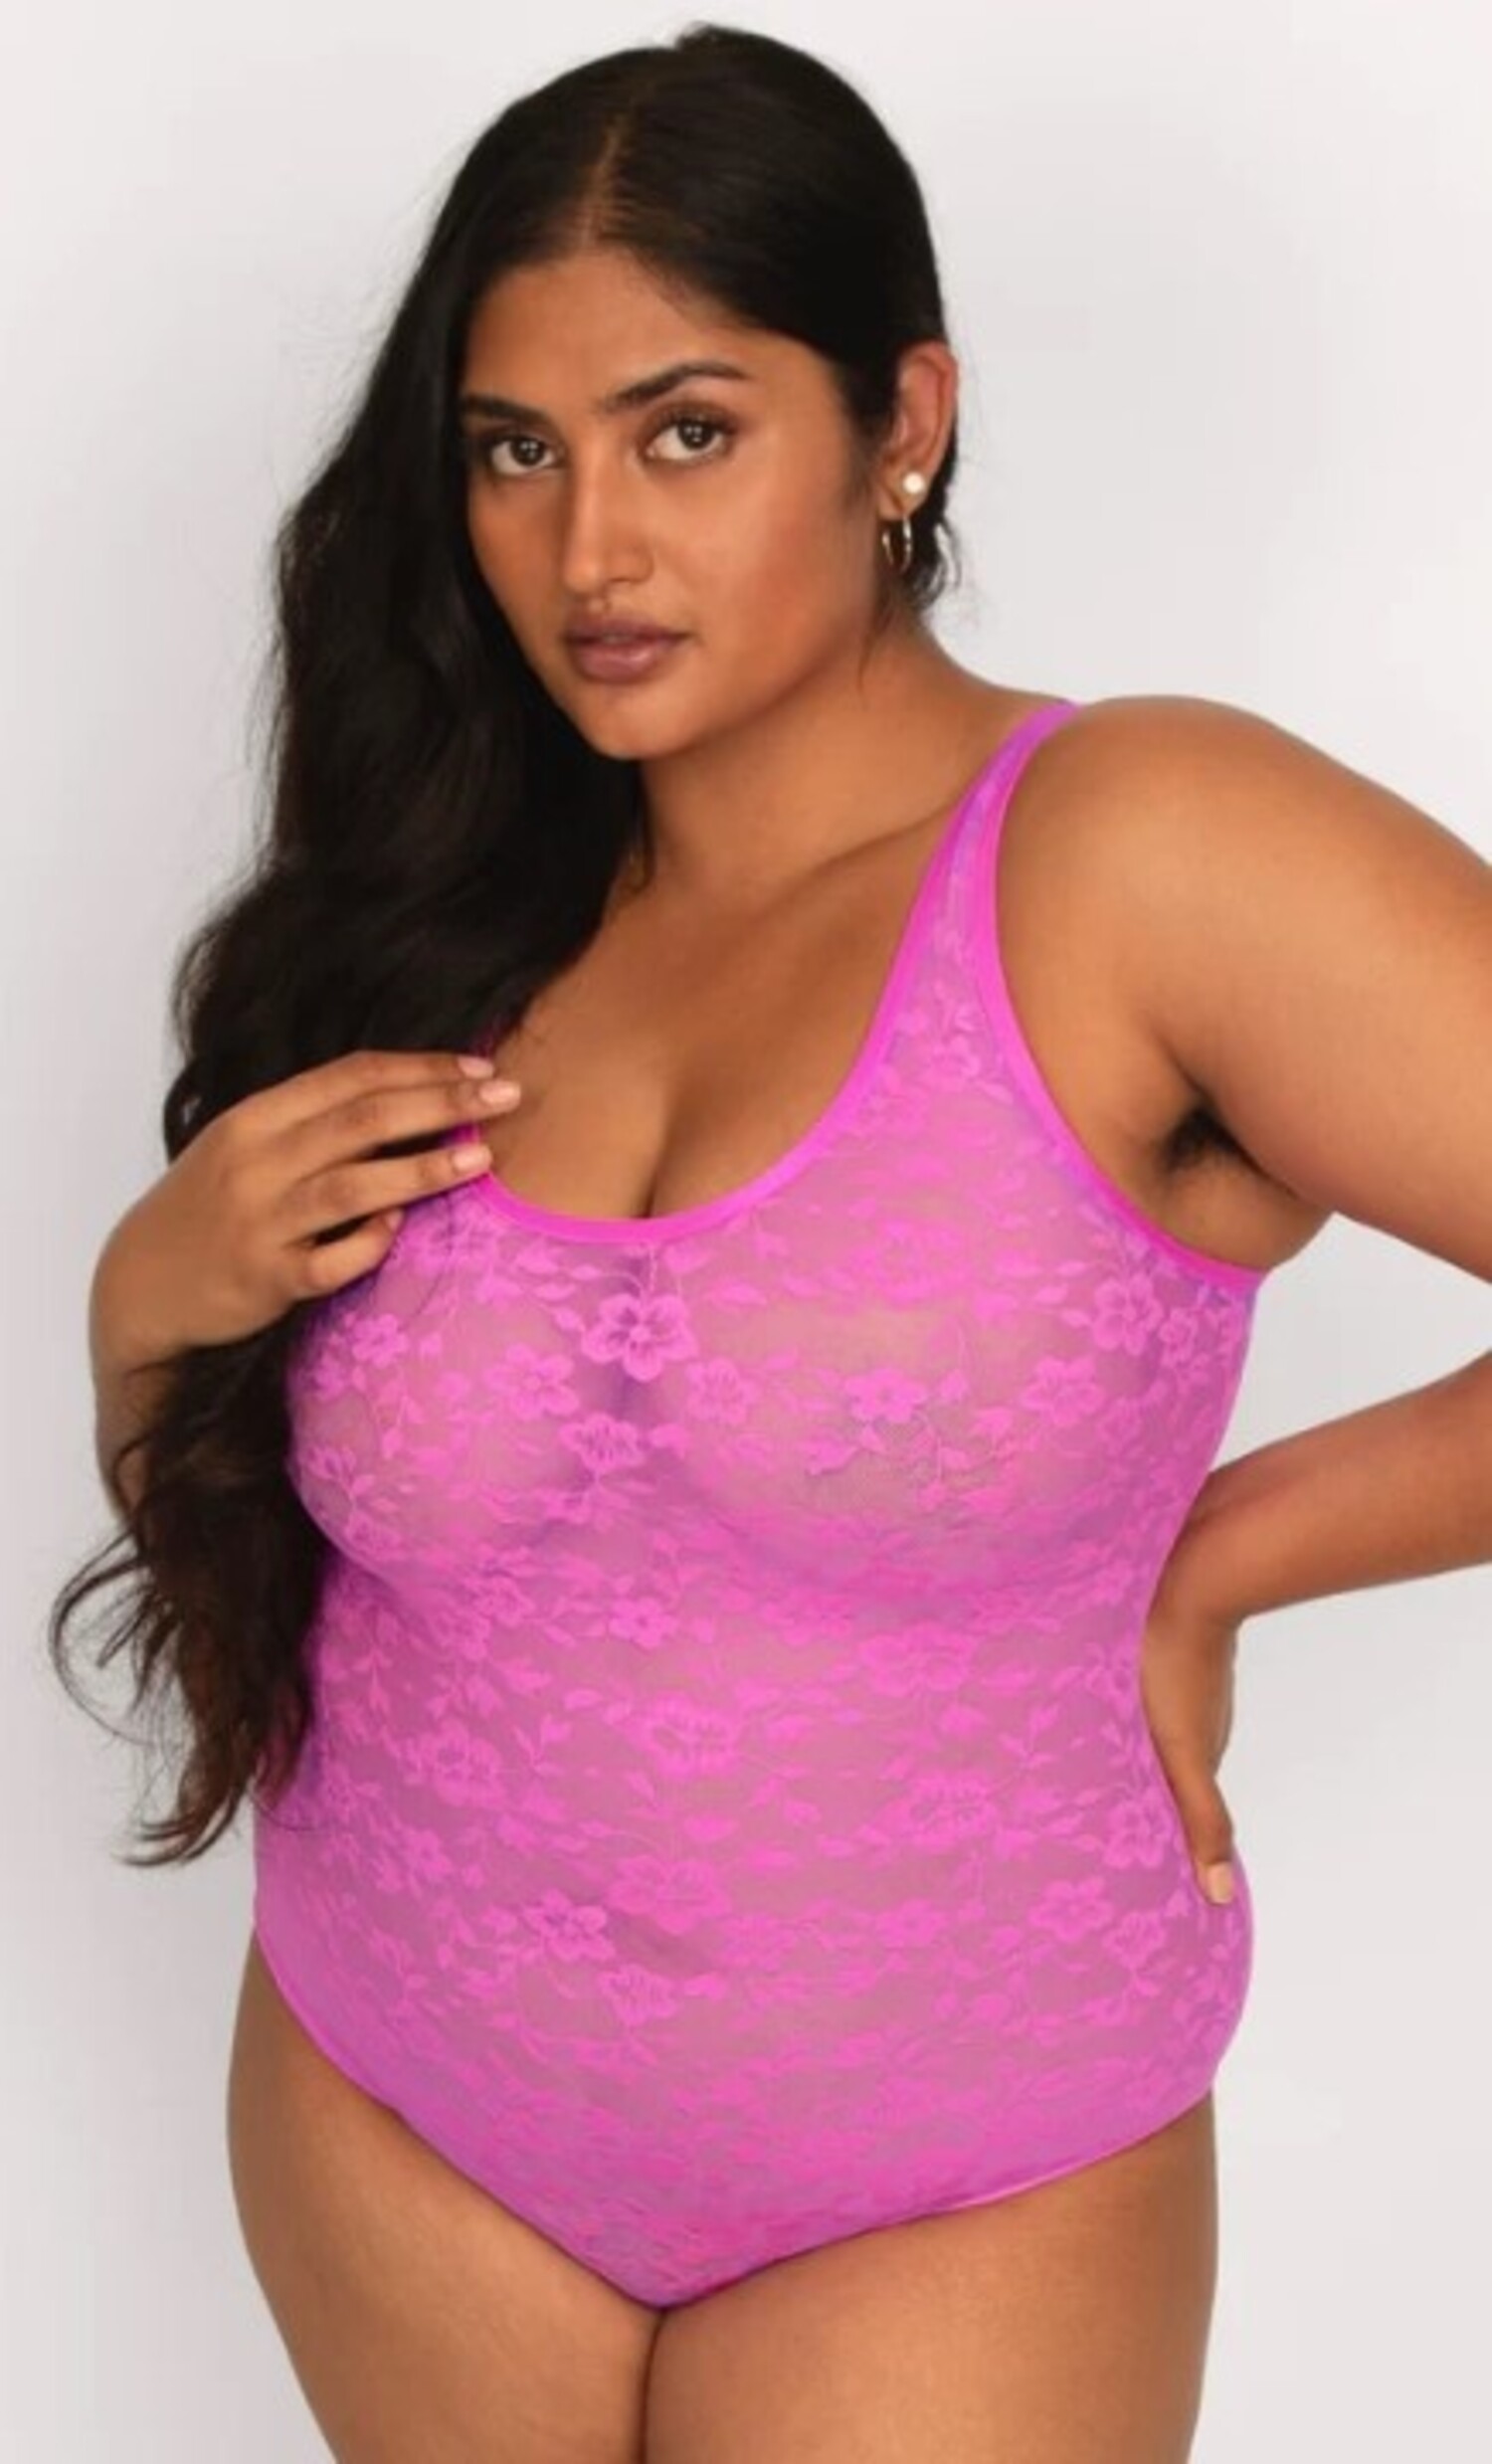 Curvy Couture - Sheer Mesh Push Up -1310 - The Bra Spa - Bra Fitting  Experts in Tucson, AZ